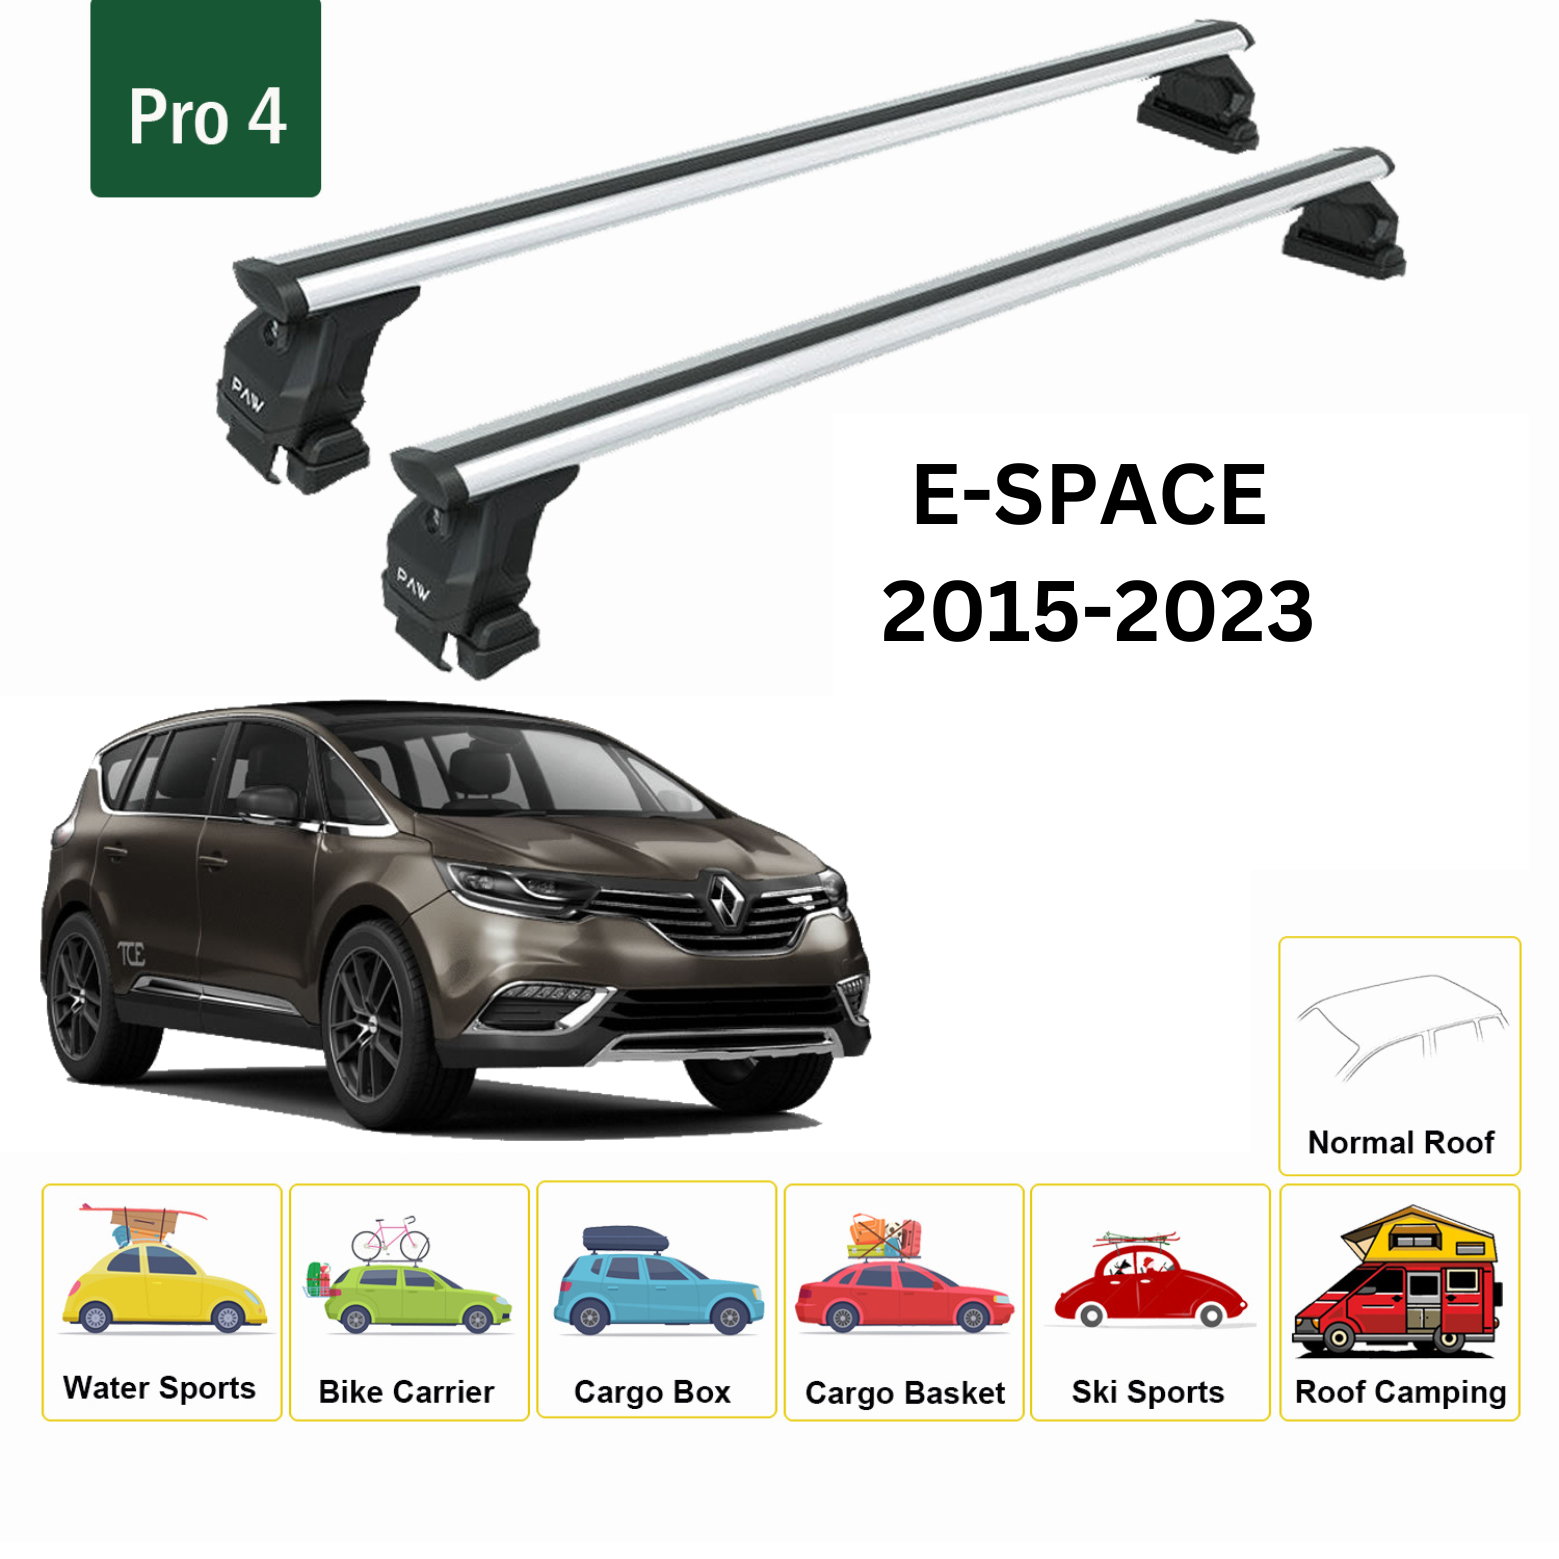 For Renault E-Space 2015-2023 Roof Rack System, Aluminium Cross Bar, Metal Bracket, Normal Roof, Silver - 0